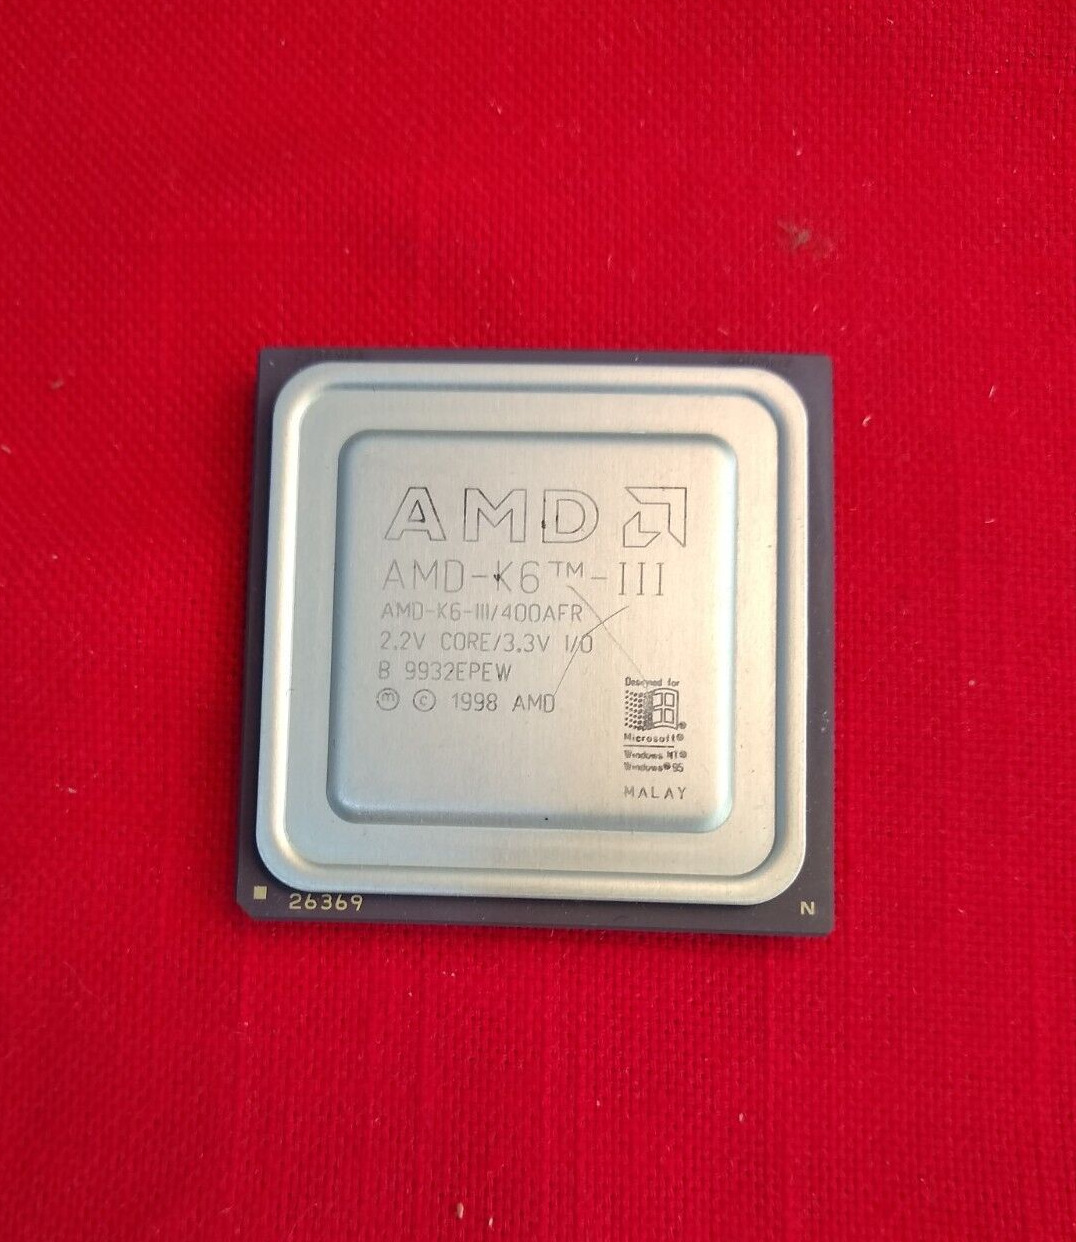 AMD AMD-K6-3/400AFR K6-III 400AFR 400 MHz 400MHZ ✅ VERY Rare Vintage Collectible